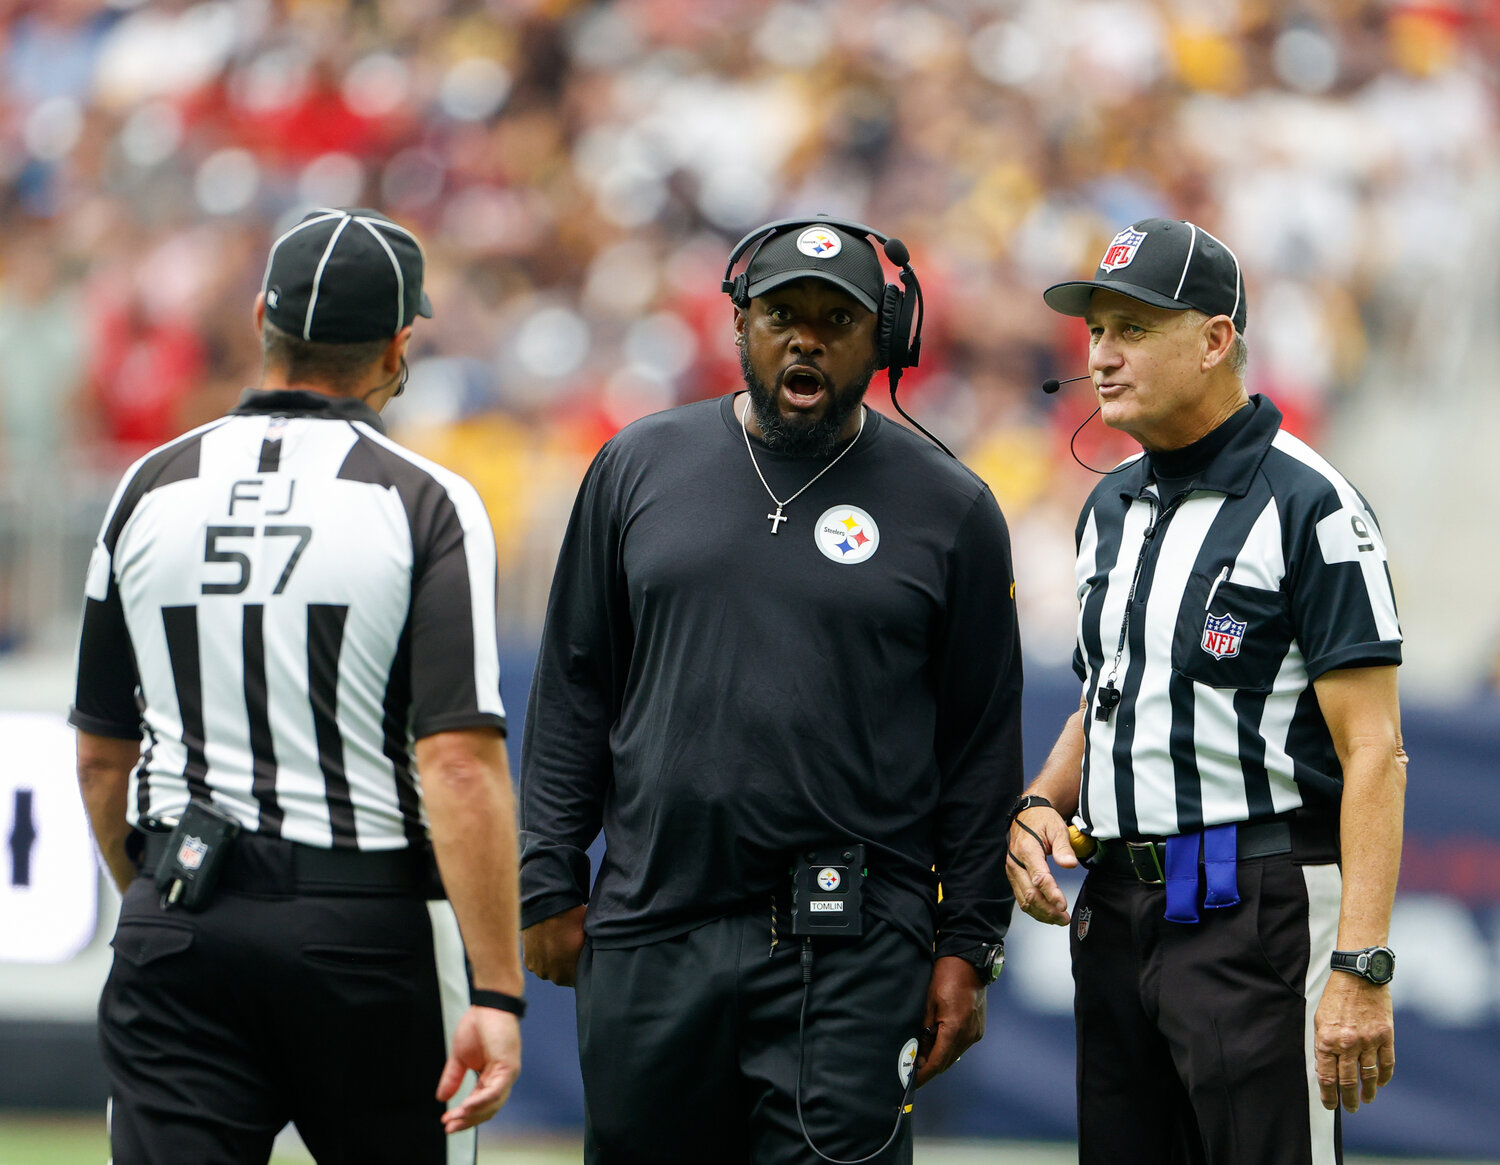 Steelers head coach Mike Tomlin discusses a call with field judge Joe Blubaugh (57) and line judge Mark Perlman (9) during an NFL game between the Houston Texans and the Pittsburgh Steelers on October 1, 2023 in Houston.